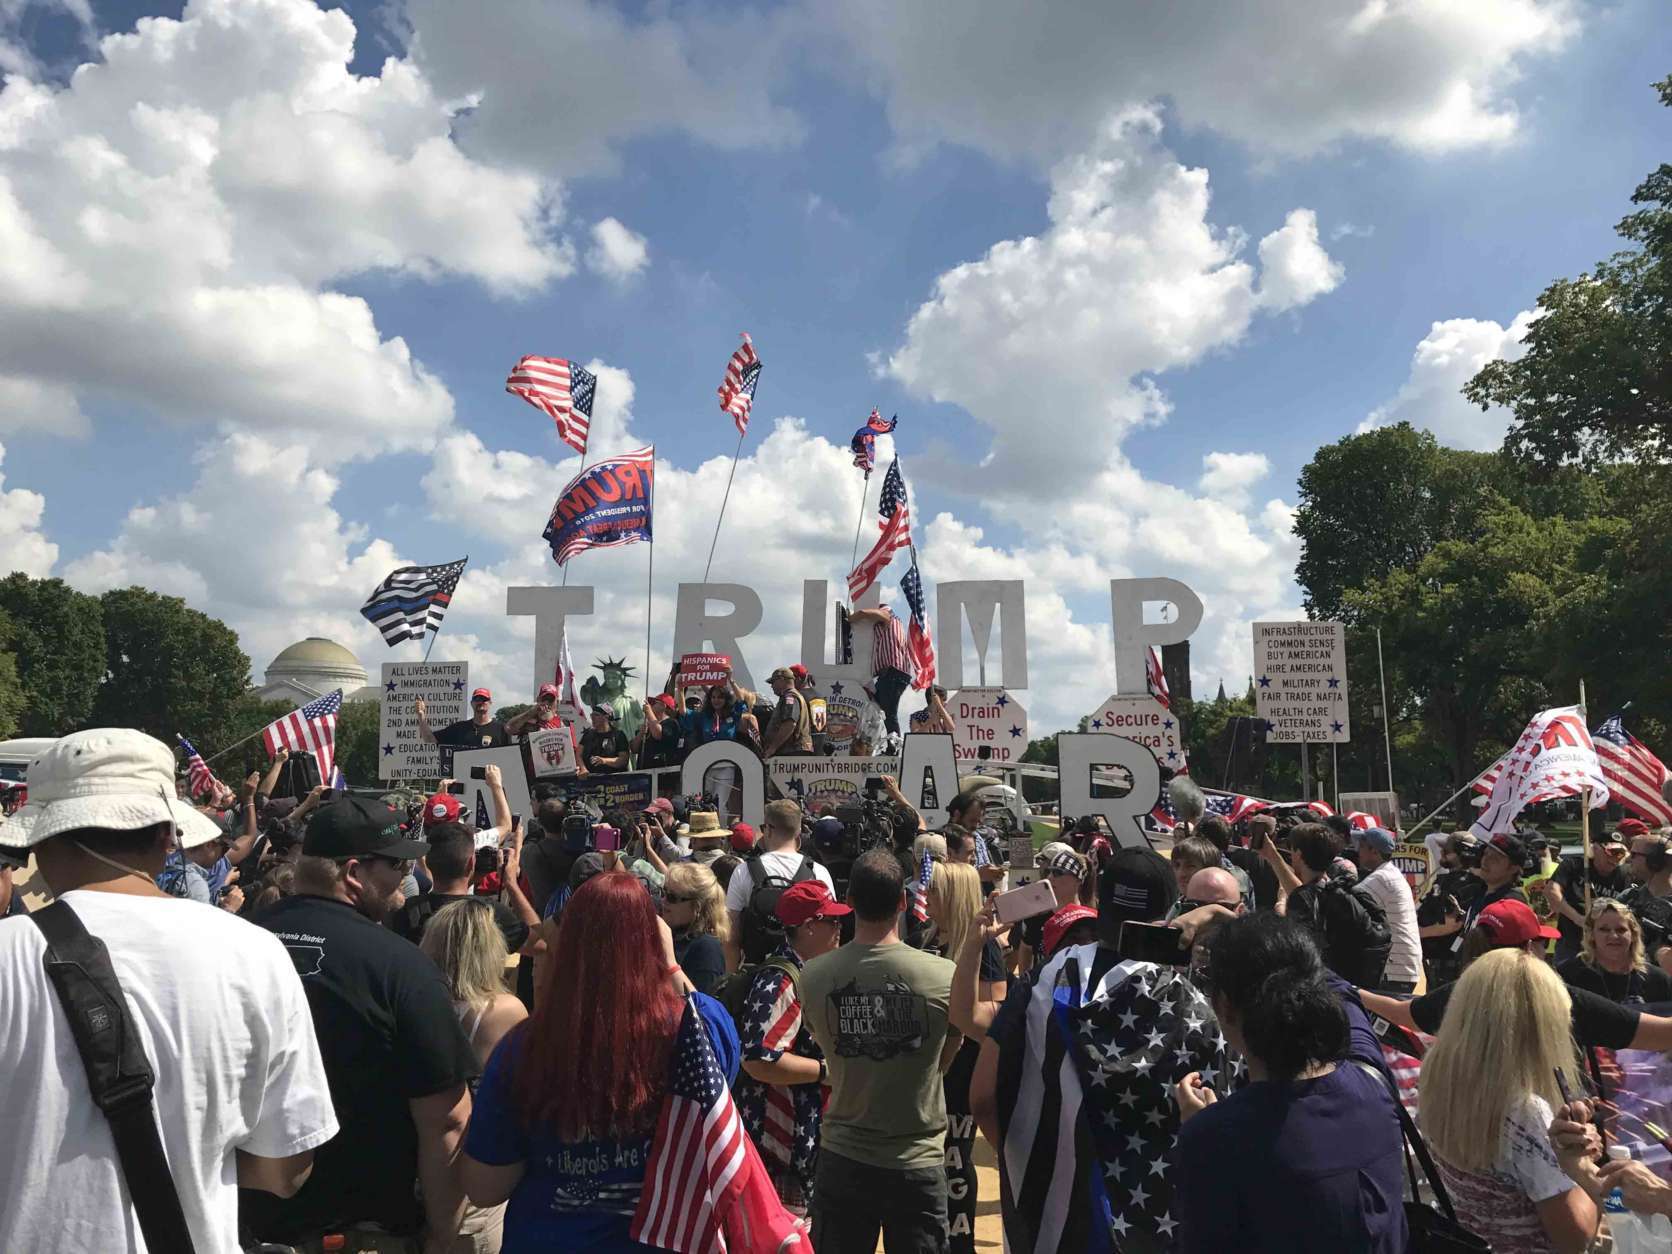 Dozens of rally goers turned out in front of Smithsonian Institute's National Museum of American History, cheering the president. (WTOP/Dick Uliano) 